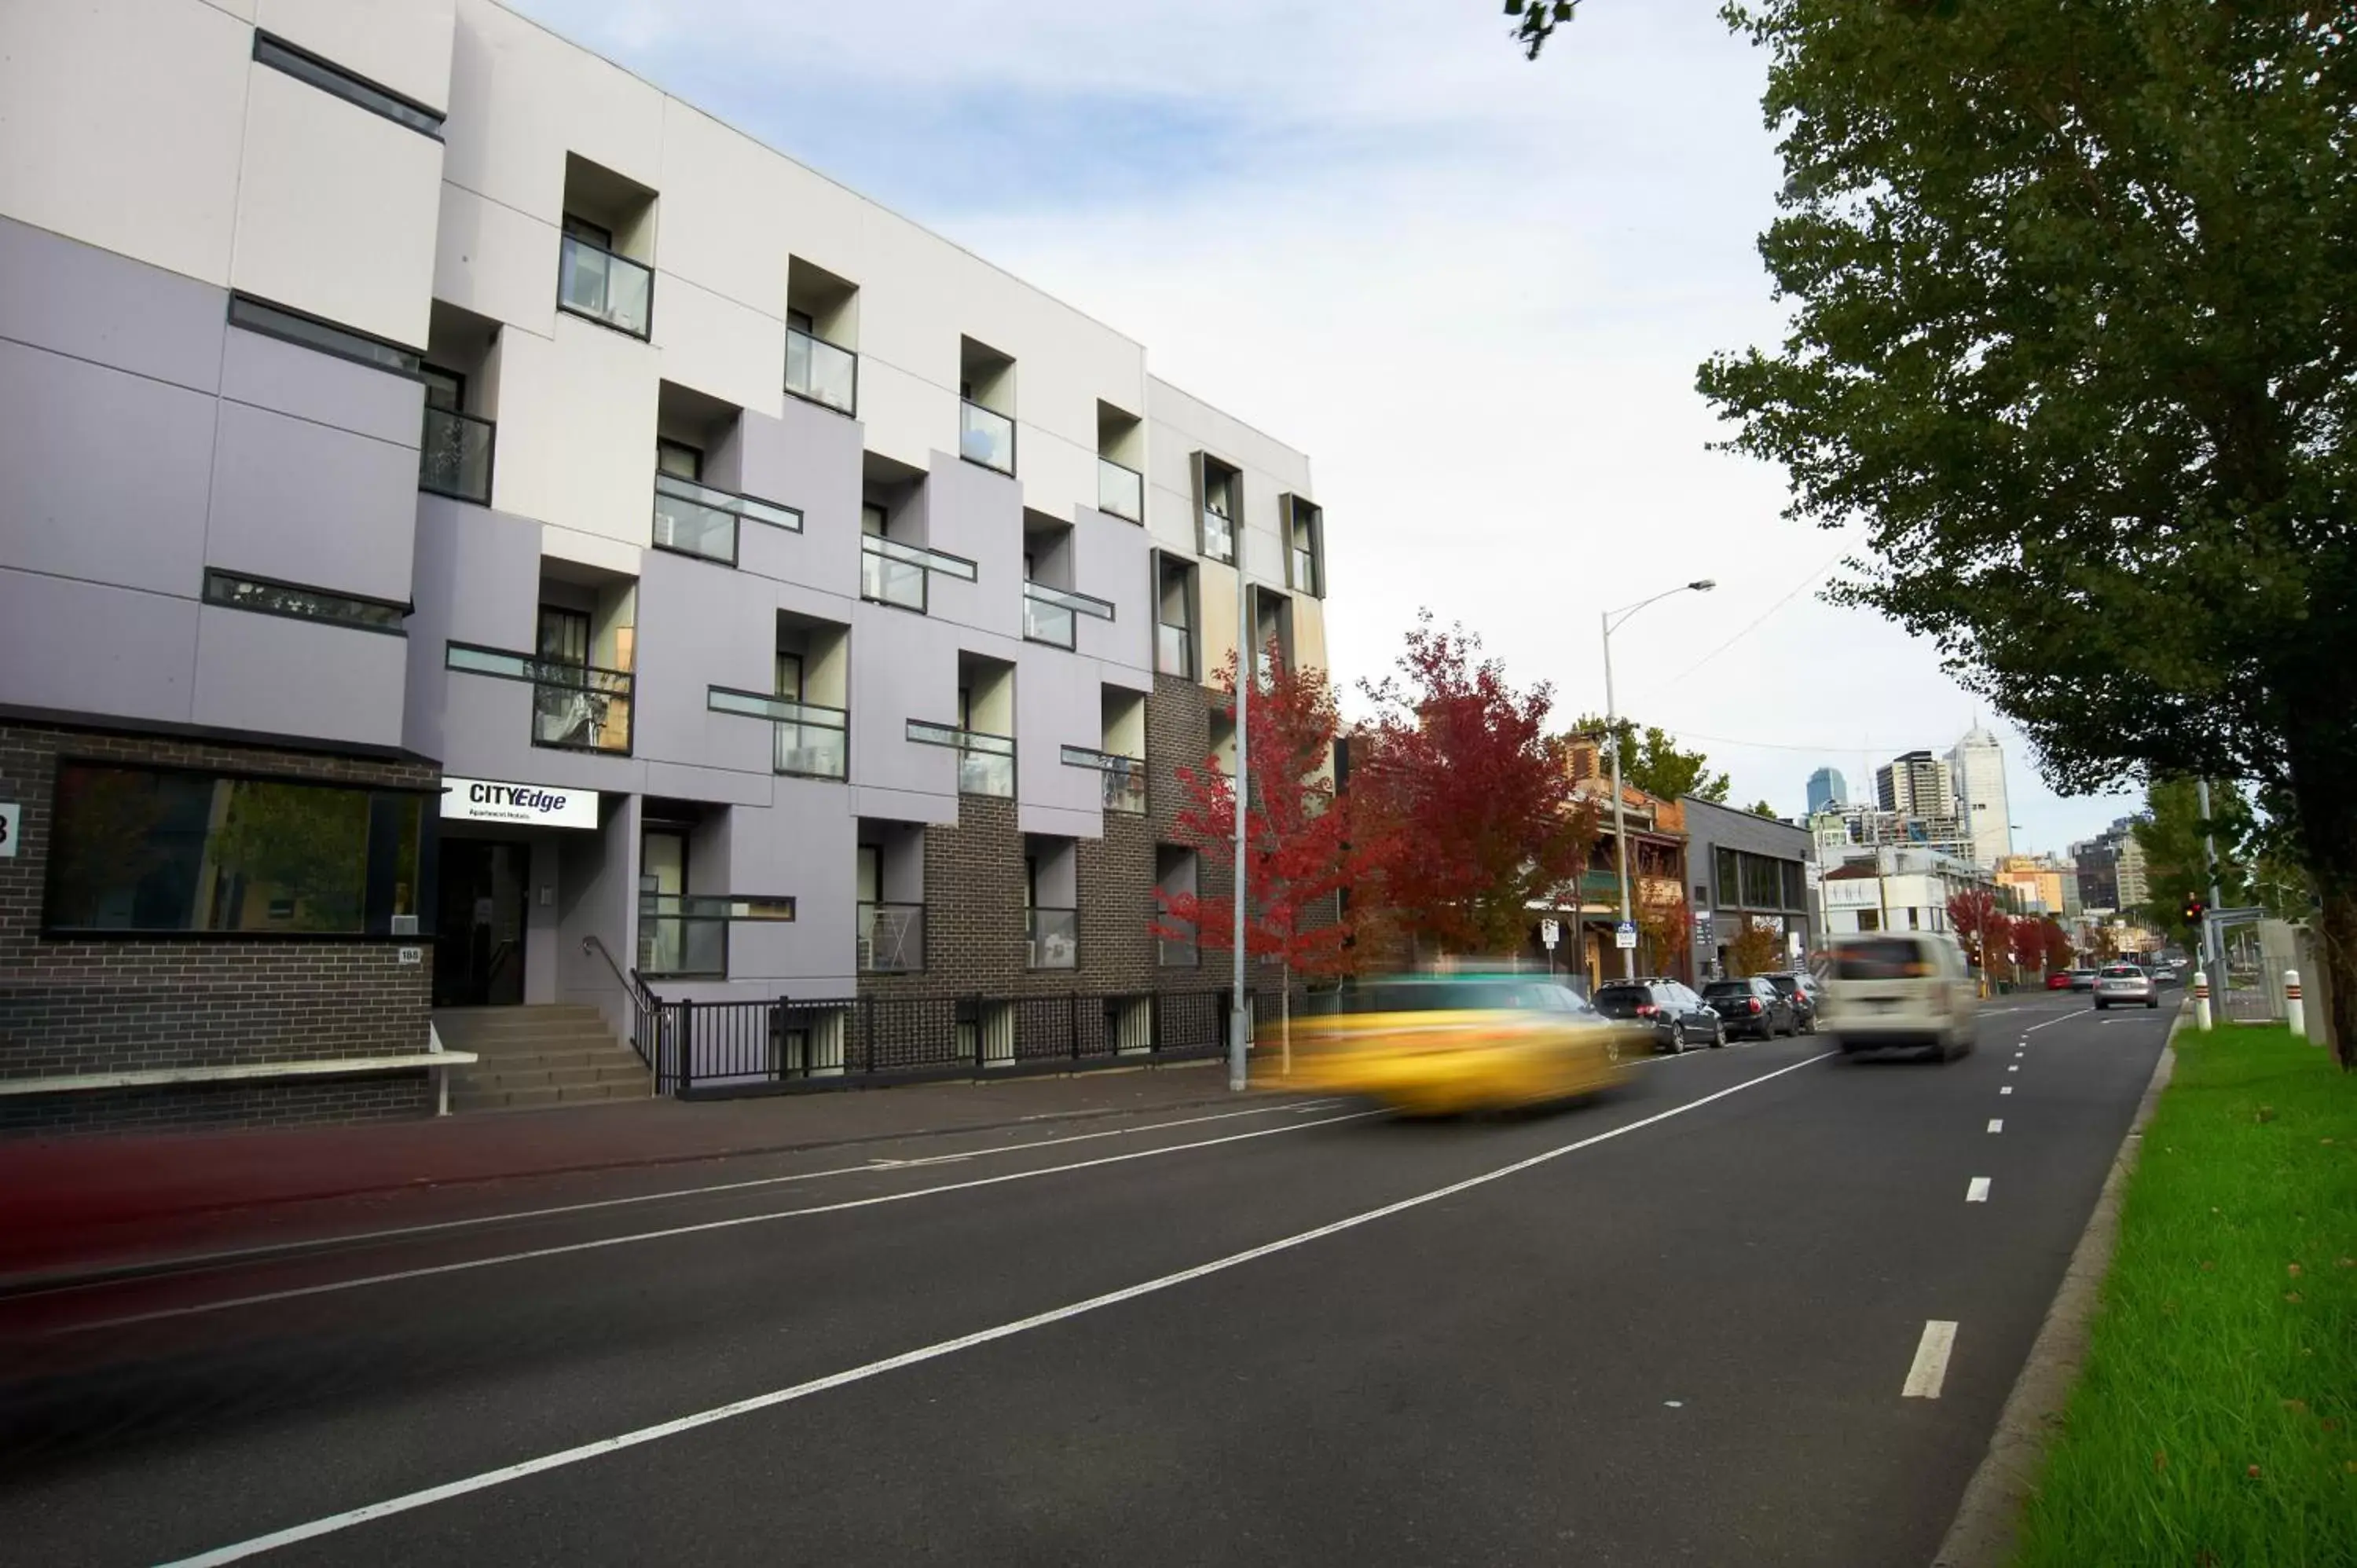 Property building in City Edge North Melbourne Apartment Hotel